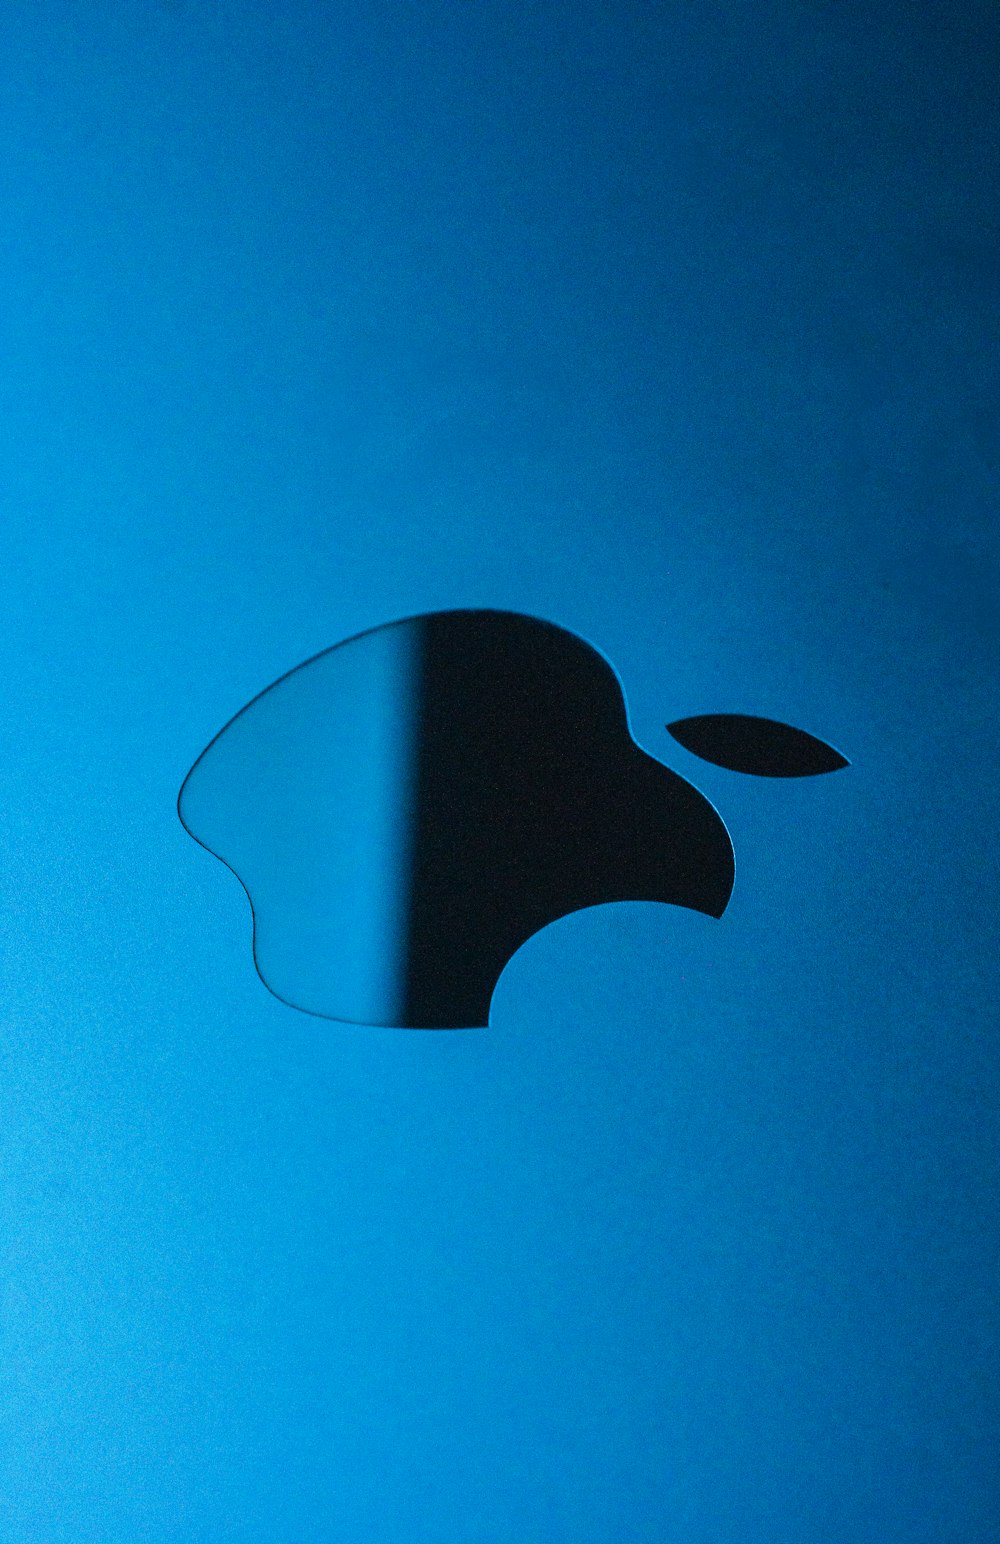 an apple logo is shown on a blue background